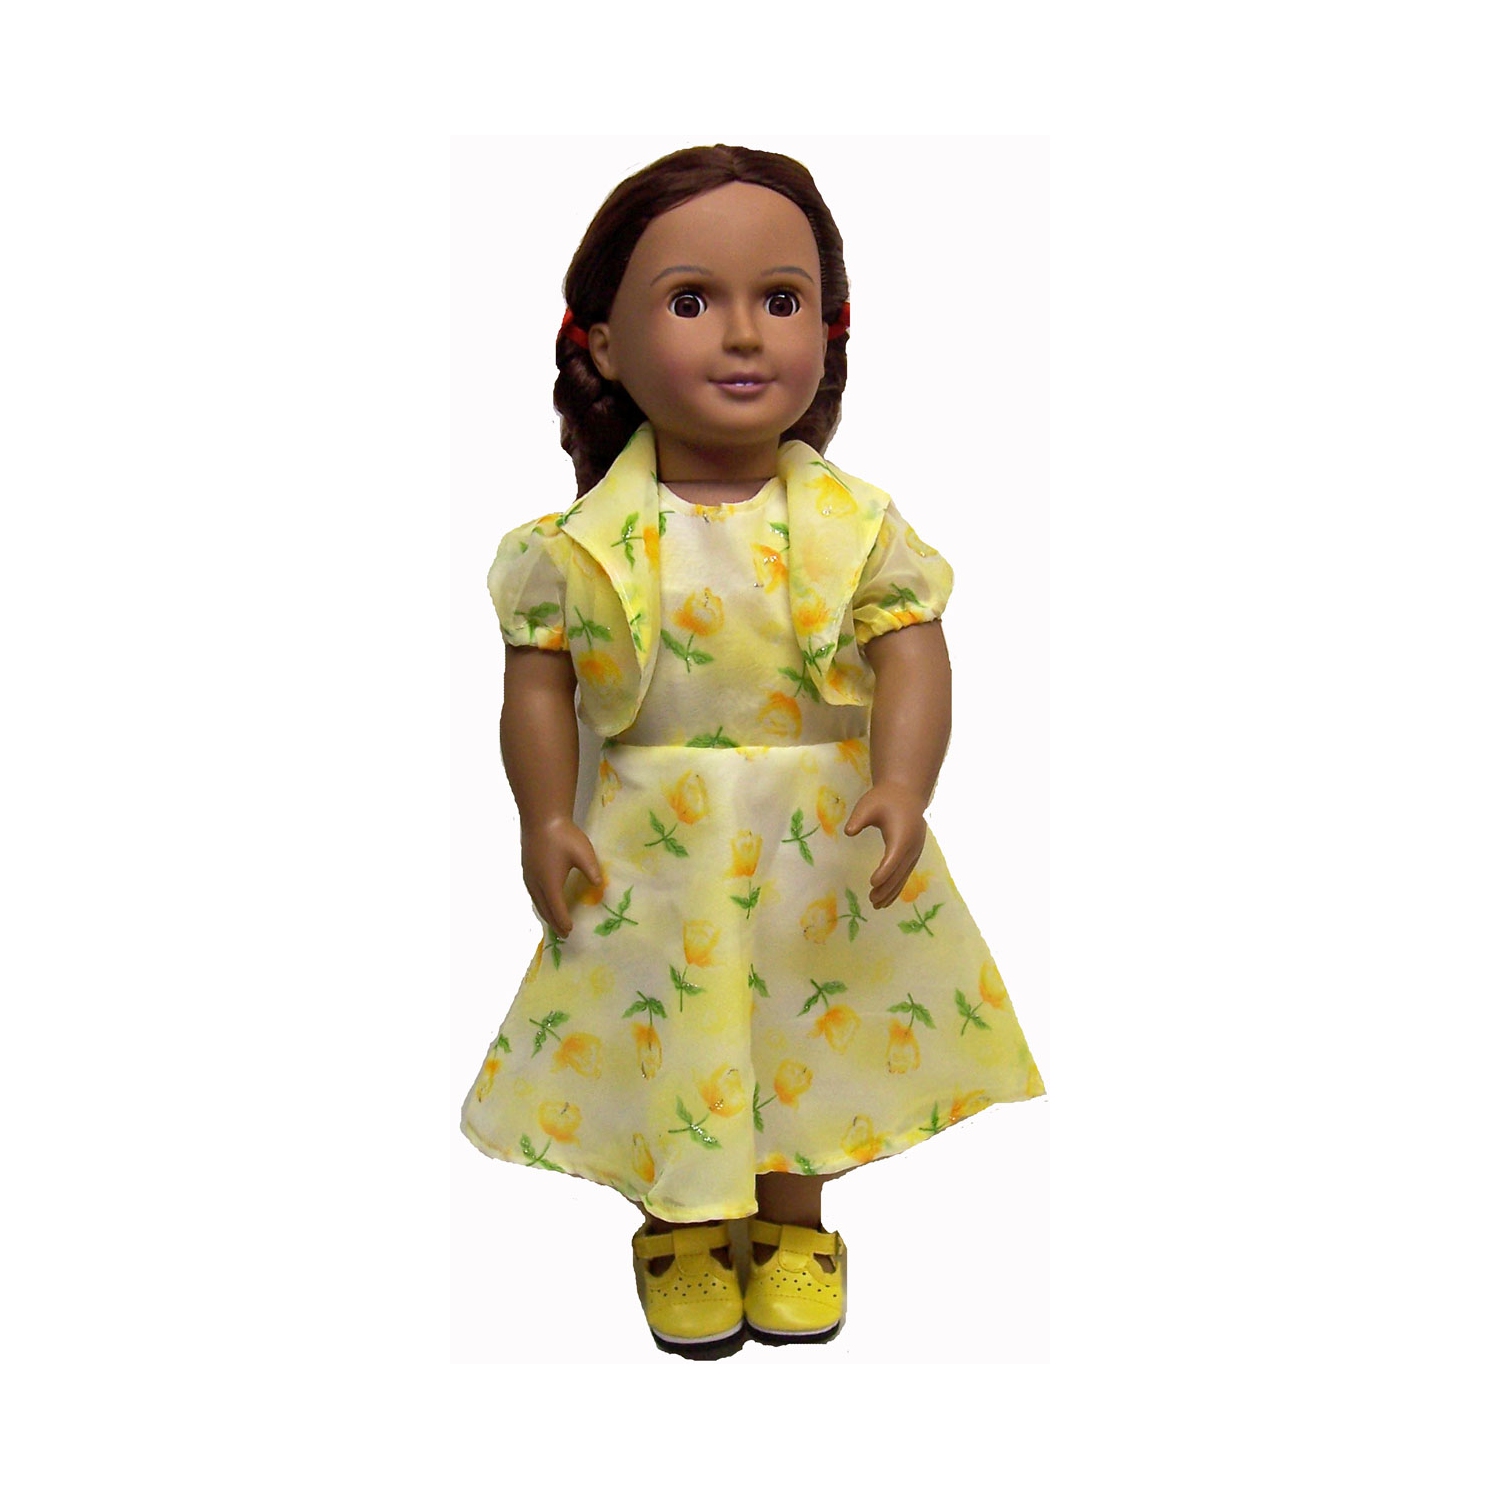 Doll Clothes Superstore Yellow Sparkle Dress With Jacket Fits 18 Inch Girl Like Our Generation American Girl My Life And 15 Inch Baby Dolls